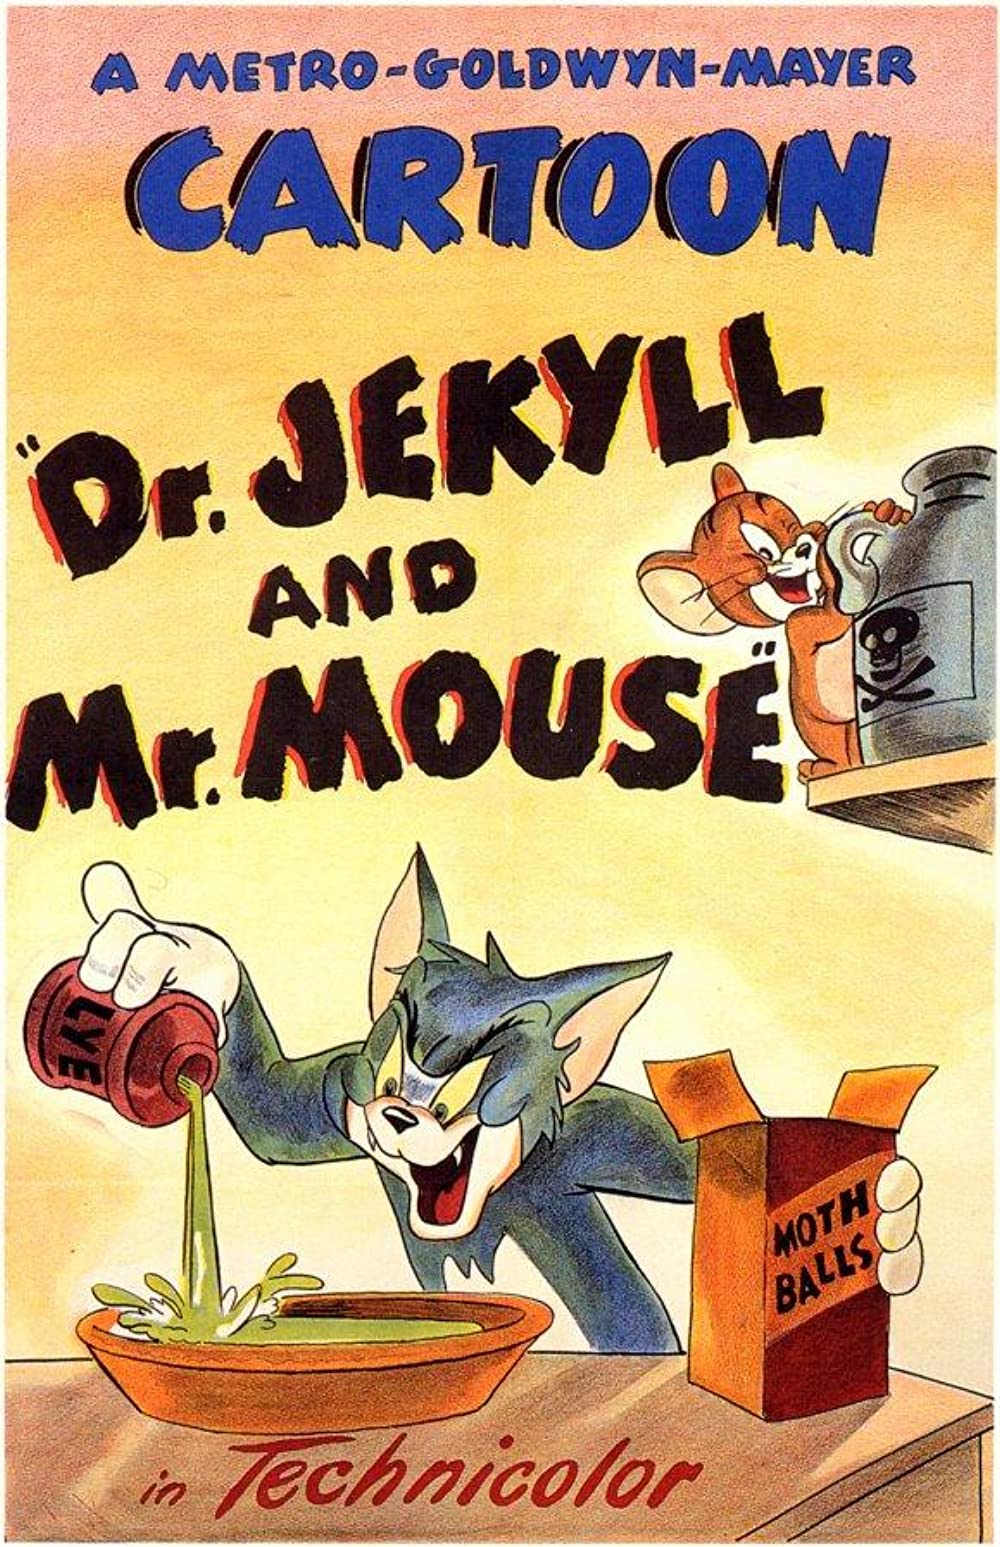 Dr. Jekyll and Mr. Mouse (Short 1947)